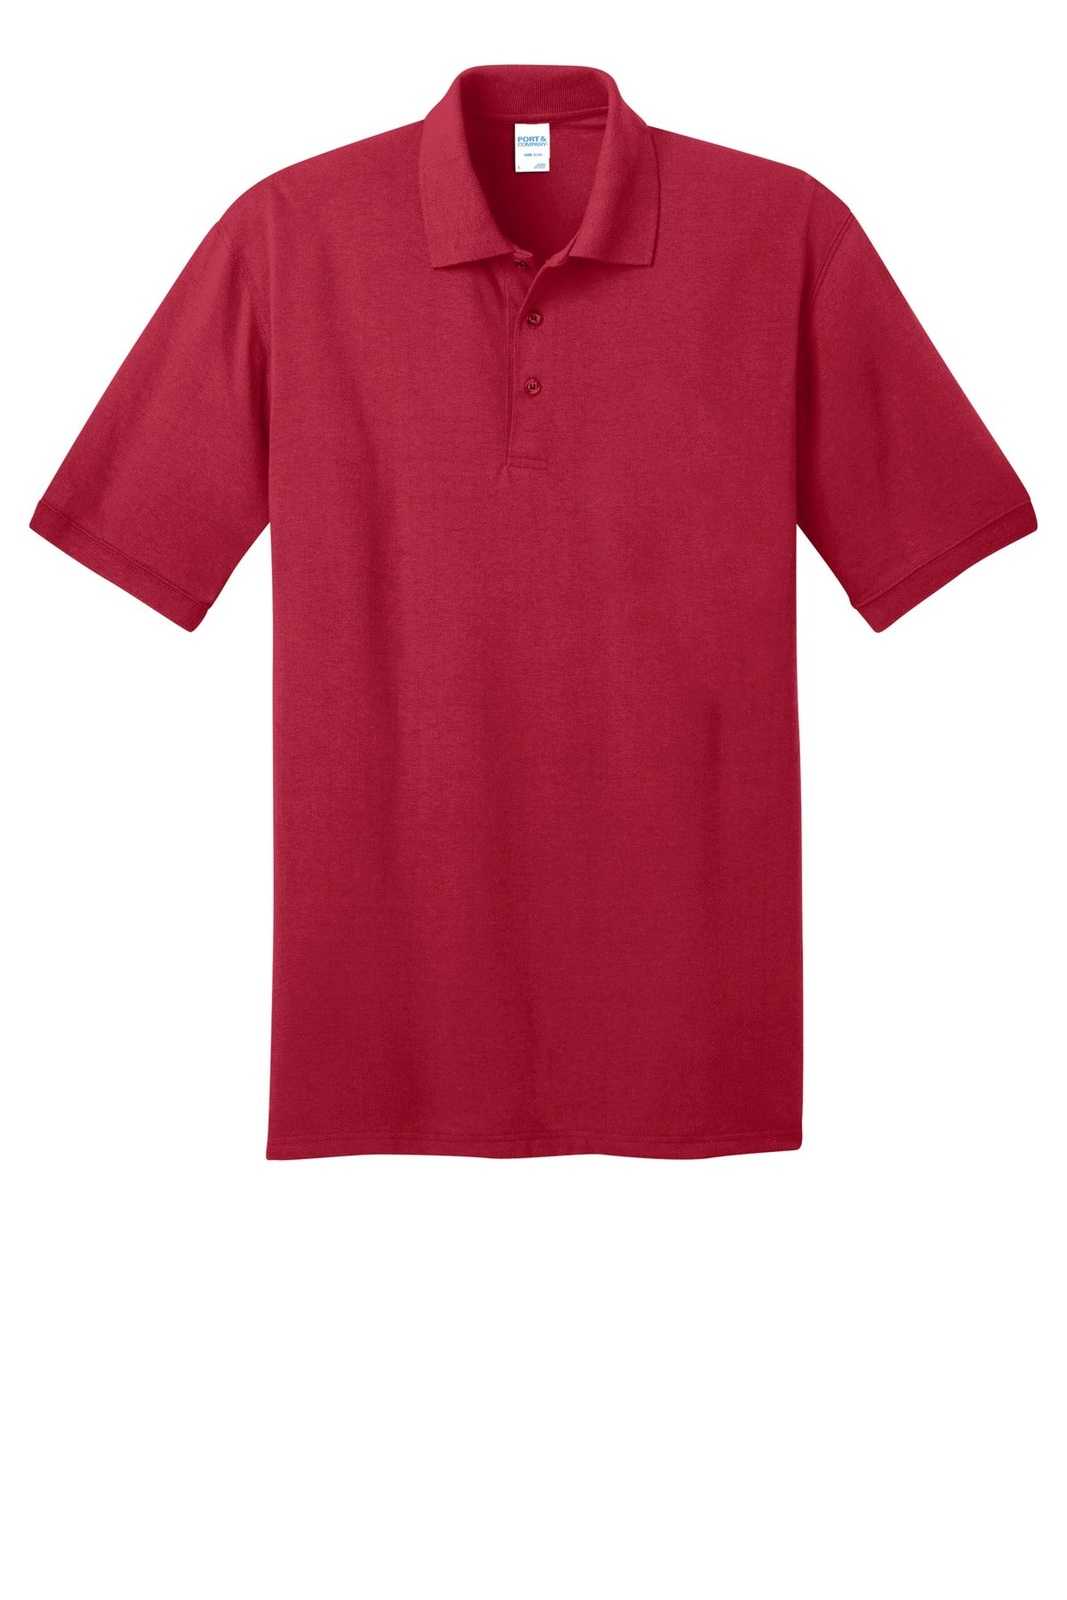 Port &amp; Company KP55T Tall Core Blend Jersey Knit Polo - Red - HIT a Double - 2